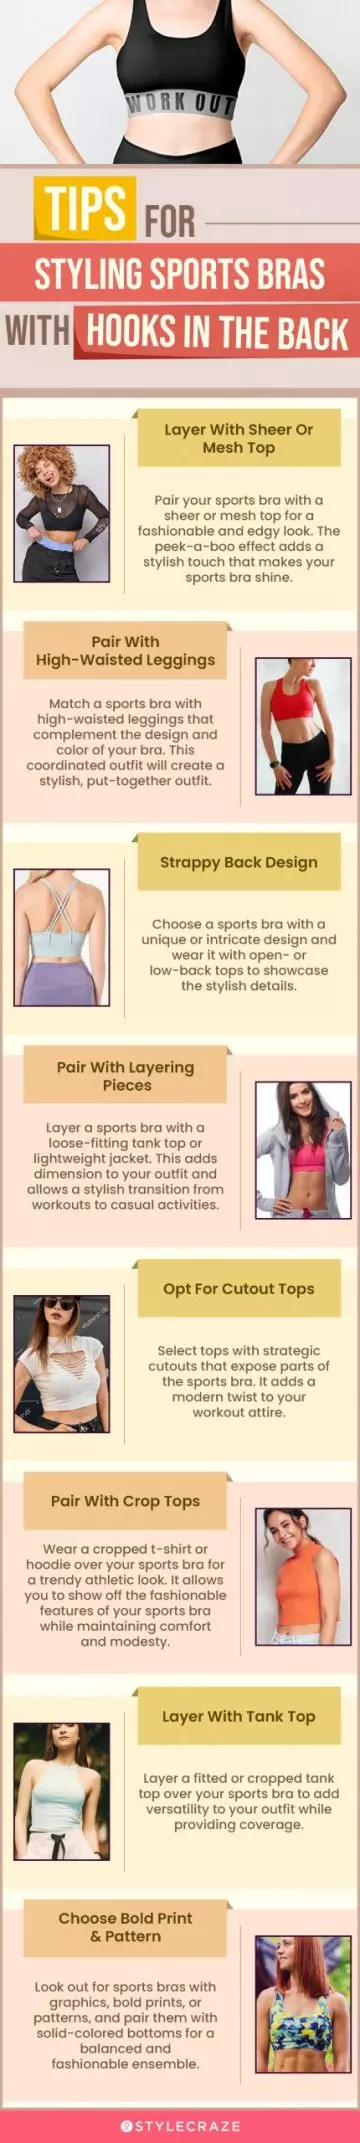 Tips For Styling Sports Bra With Hook In The Back (infographic)